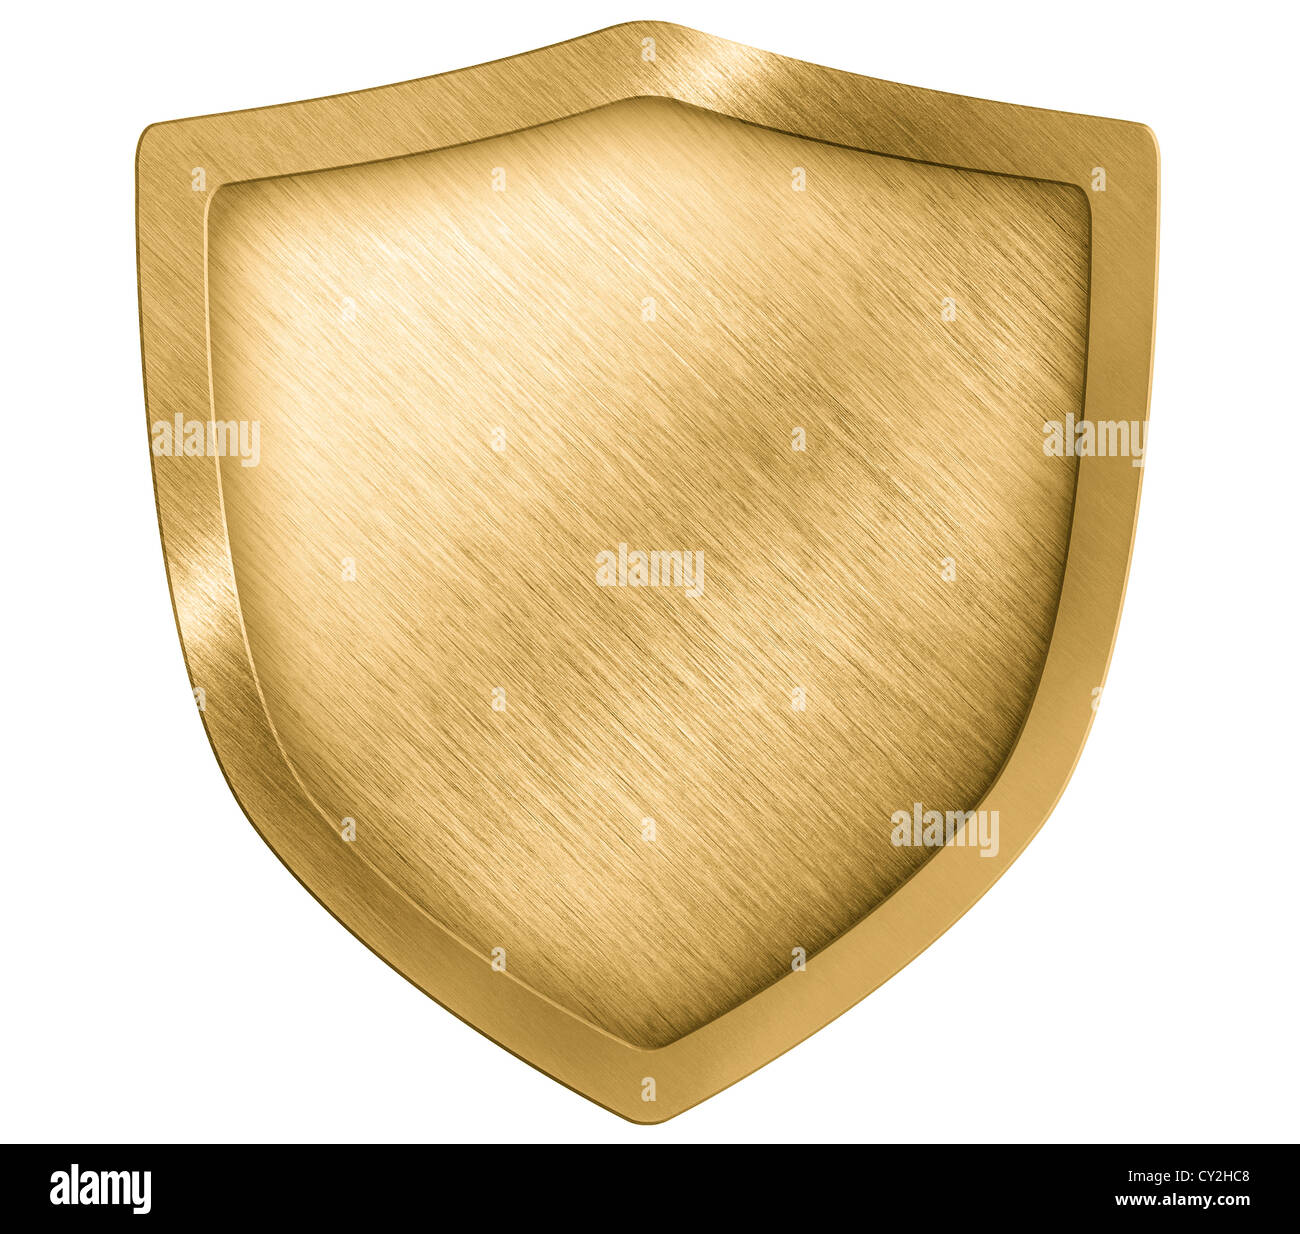 golden metal shield or crest isolated on white Stock Photo